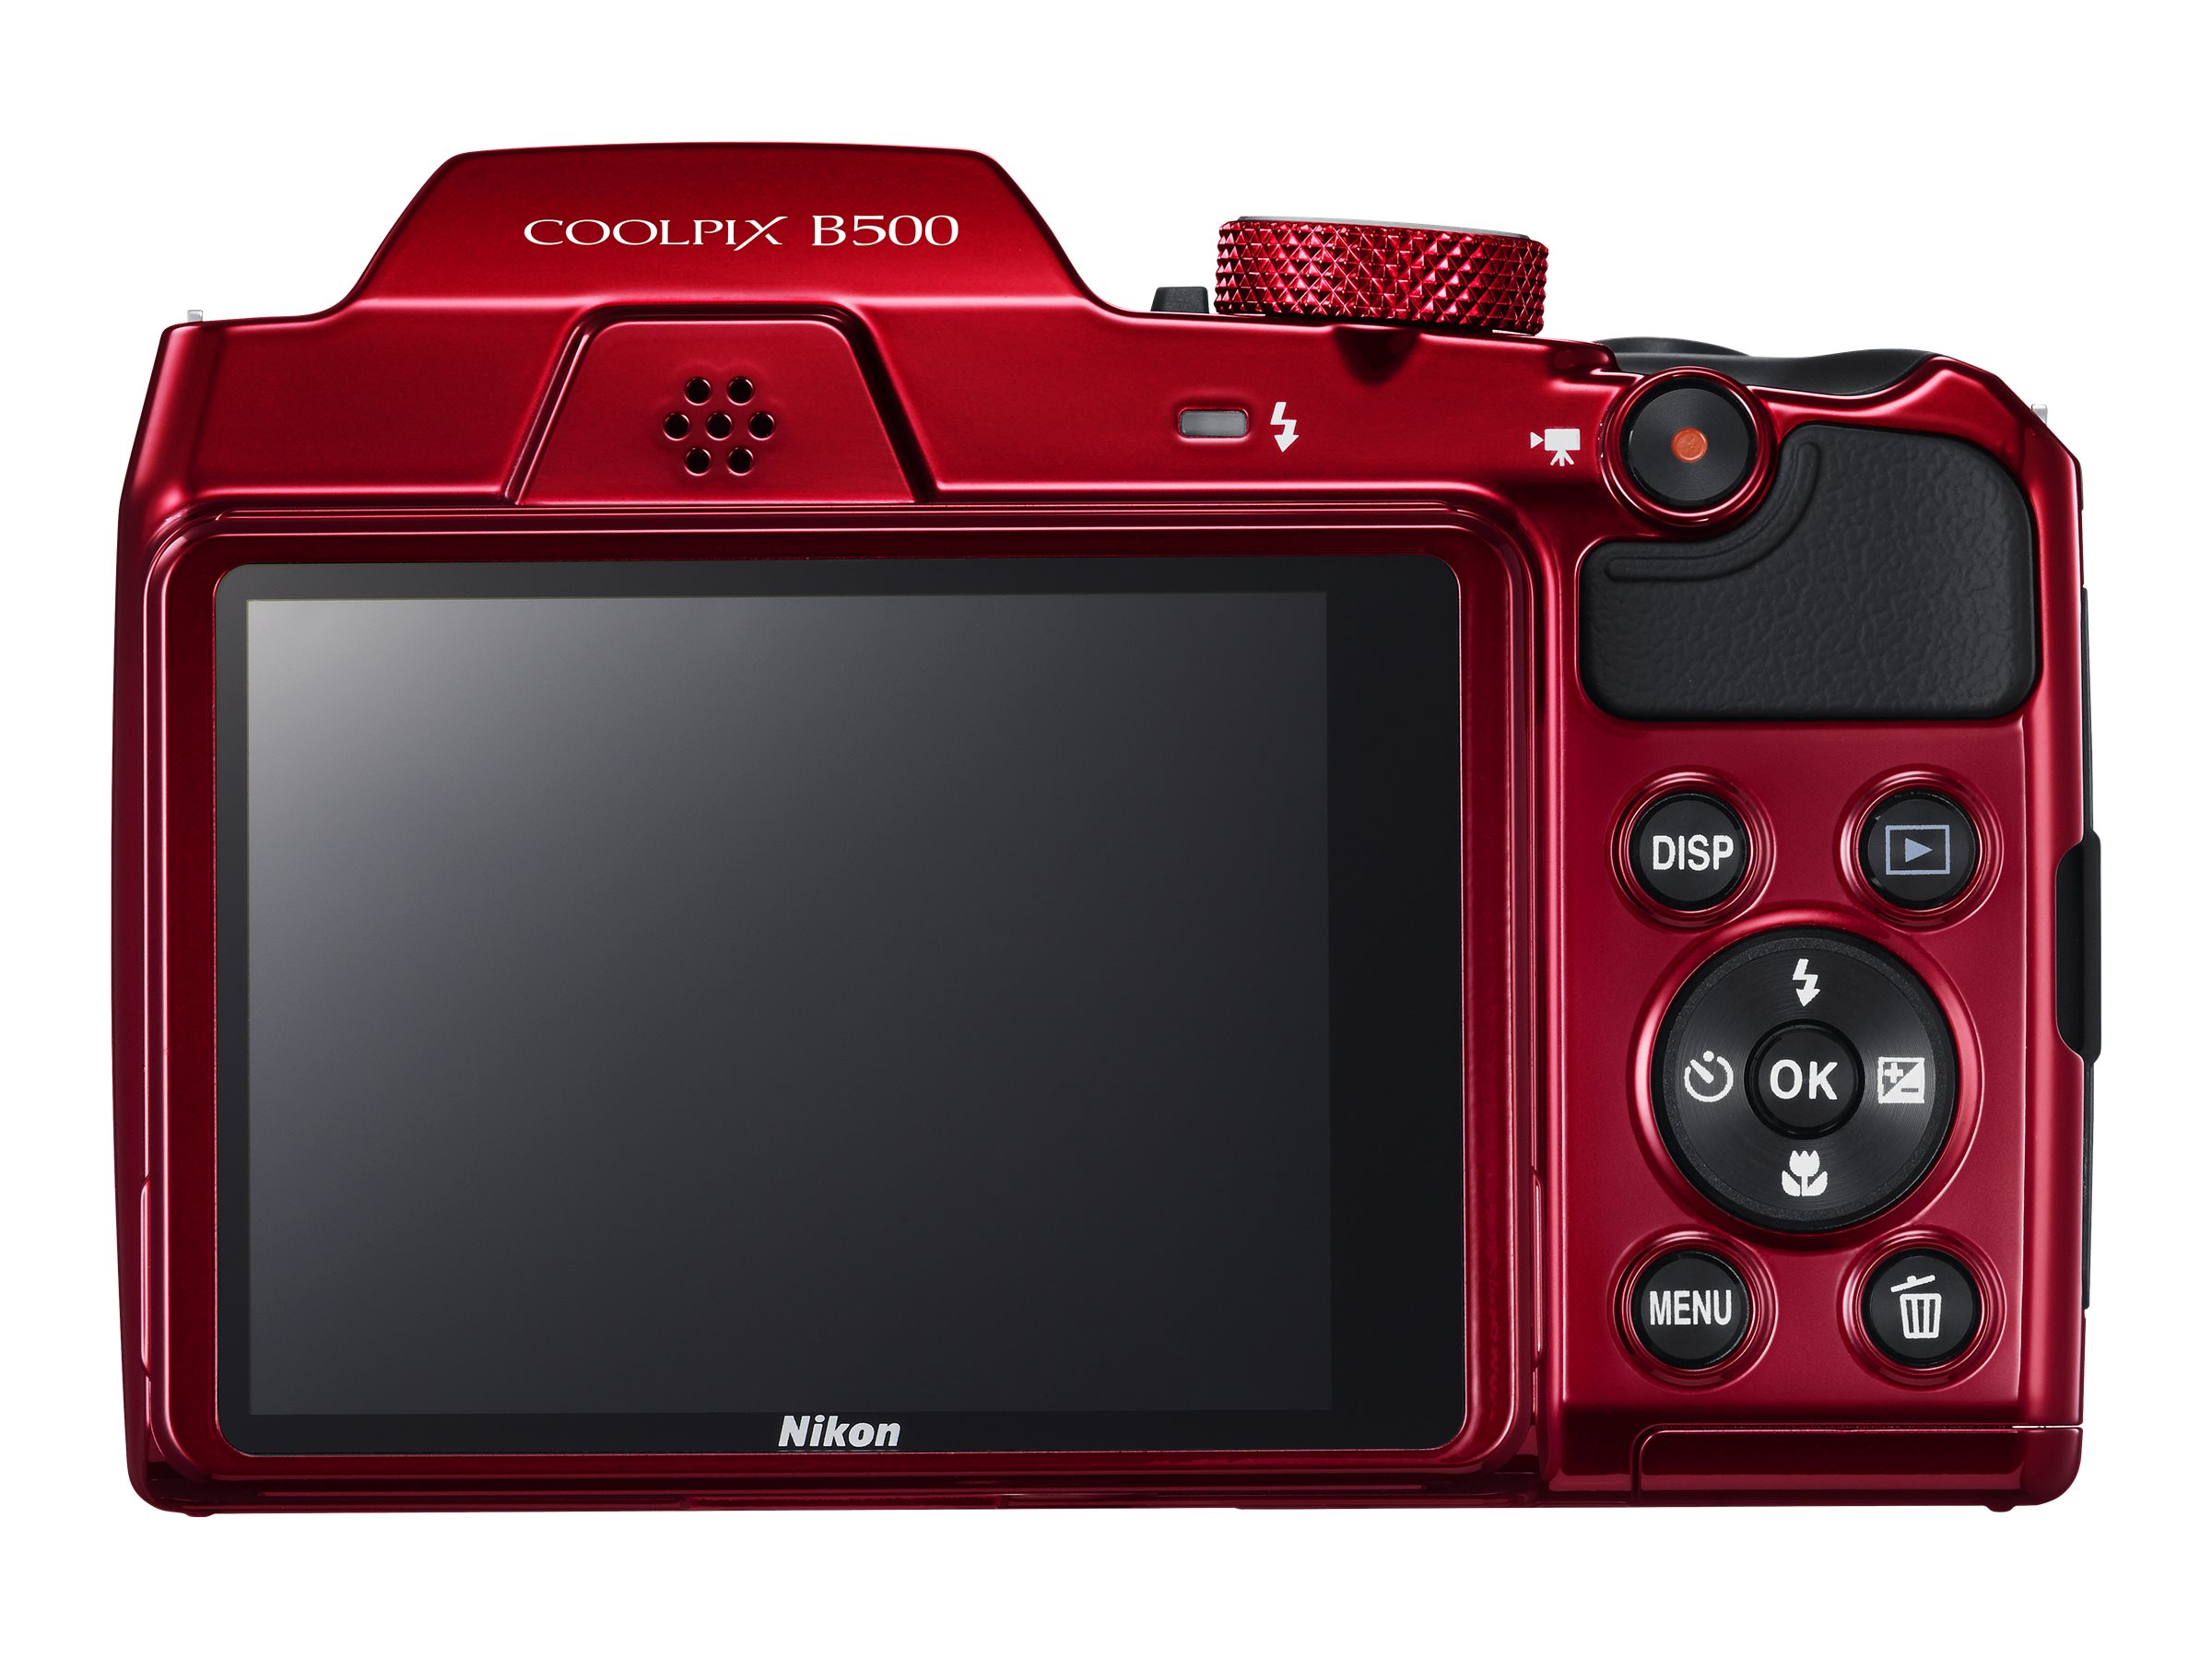 Nikon Red COOLPIX B500 Digital Camera with 16 Megapixels and 40x Optical Zoom - image 8 of 11